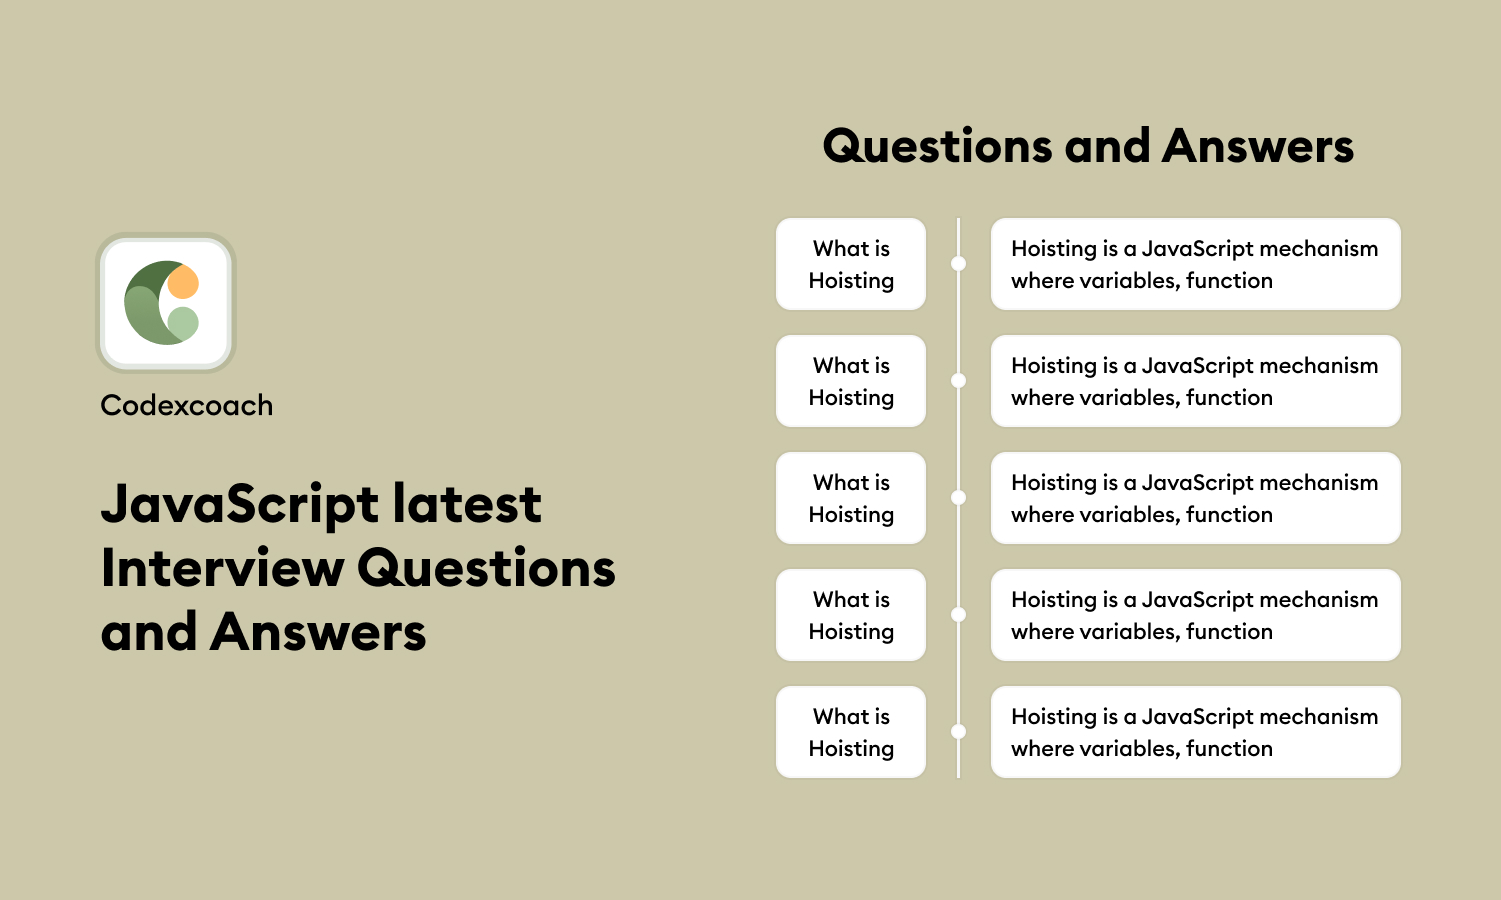 JavaScript latest Interview Questions and Answers